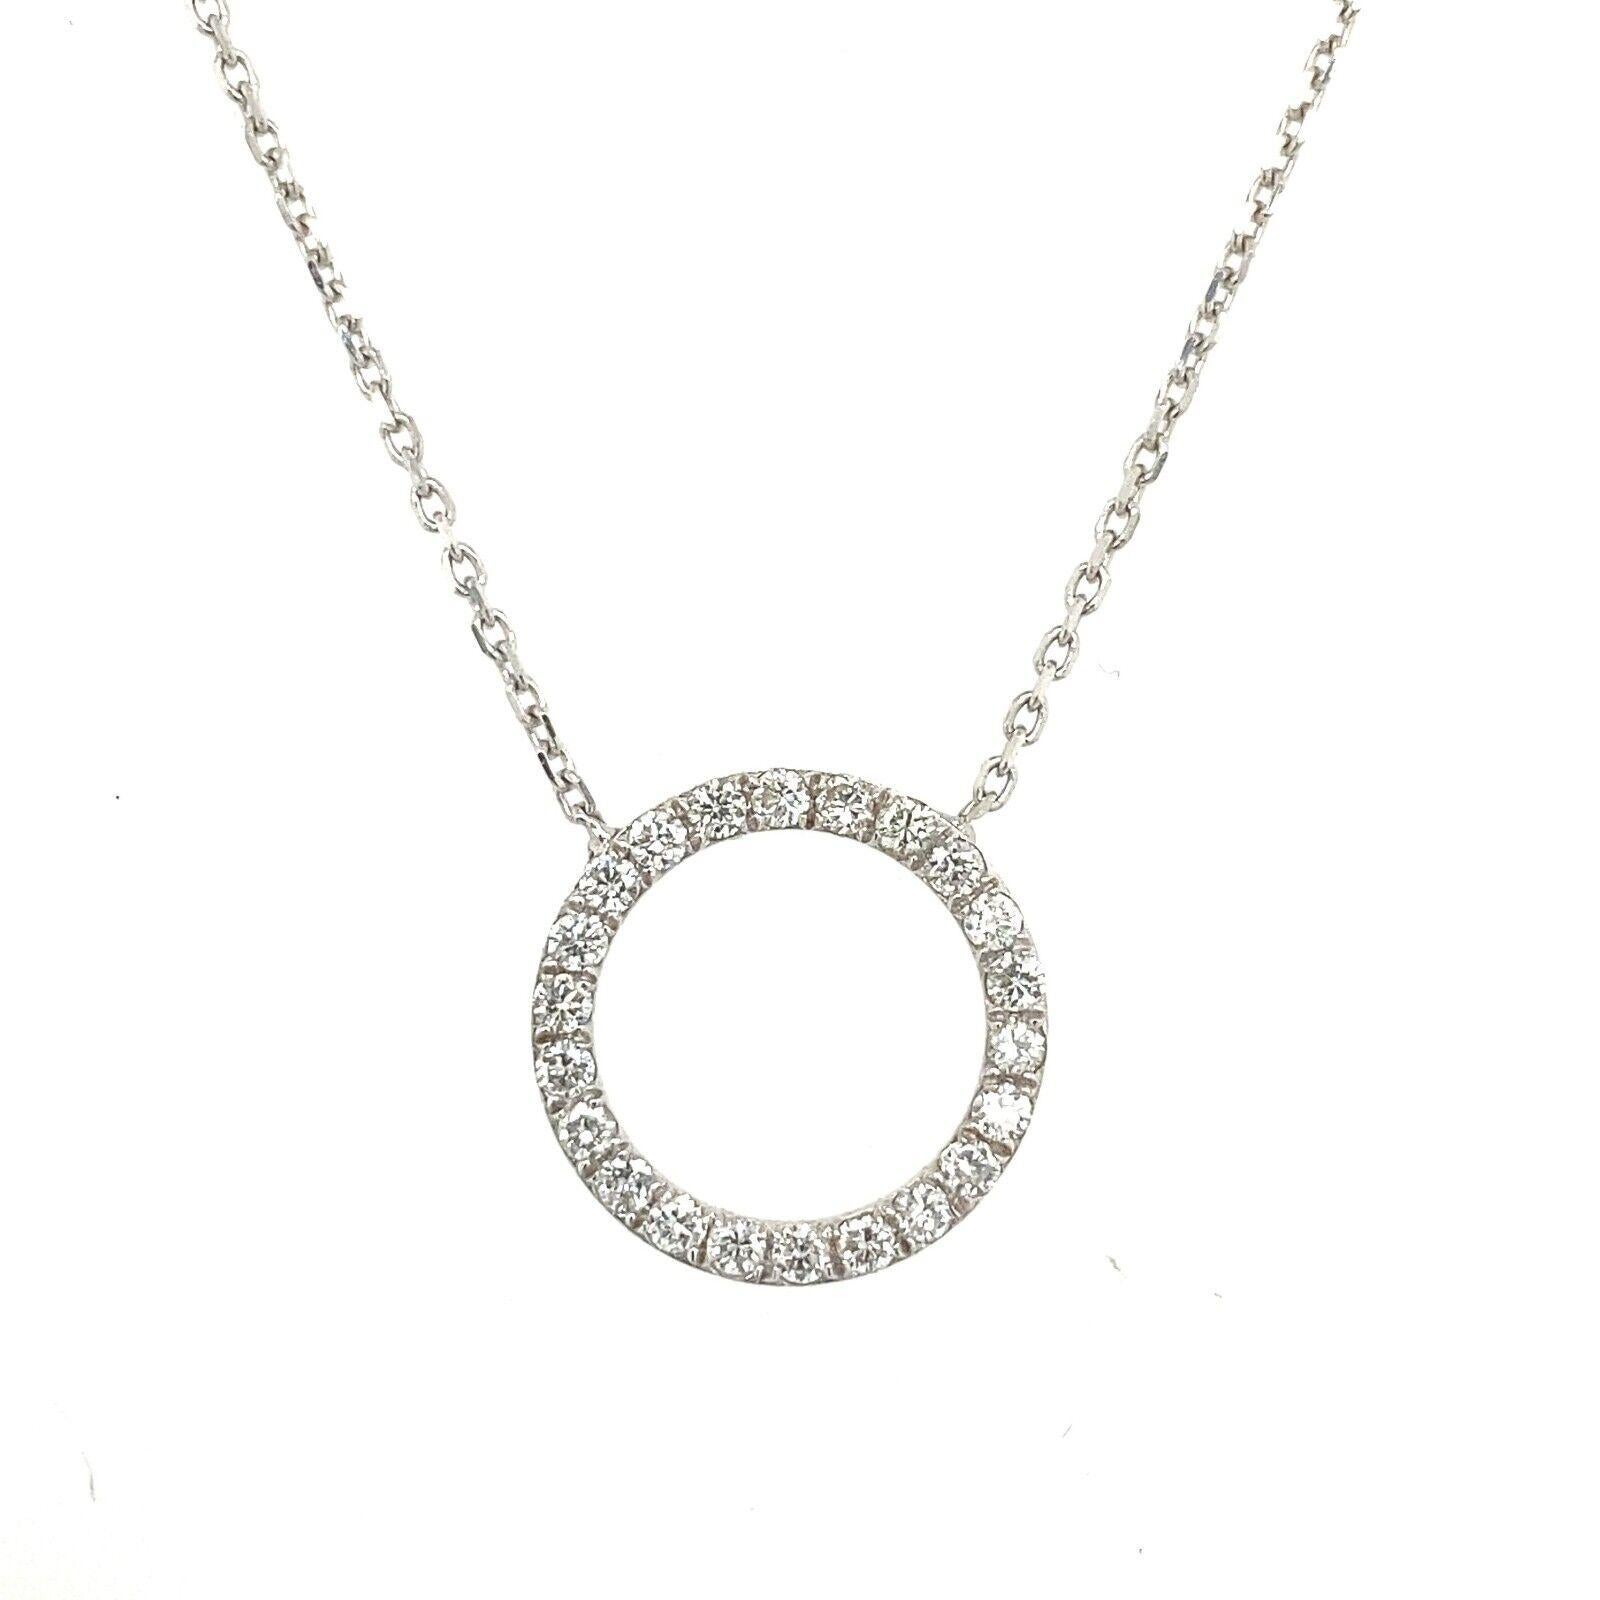 Circle of Life Necklace Set with 0.28ct of Natural Diamonds in 14ct White Gold